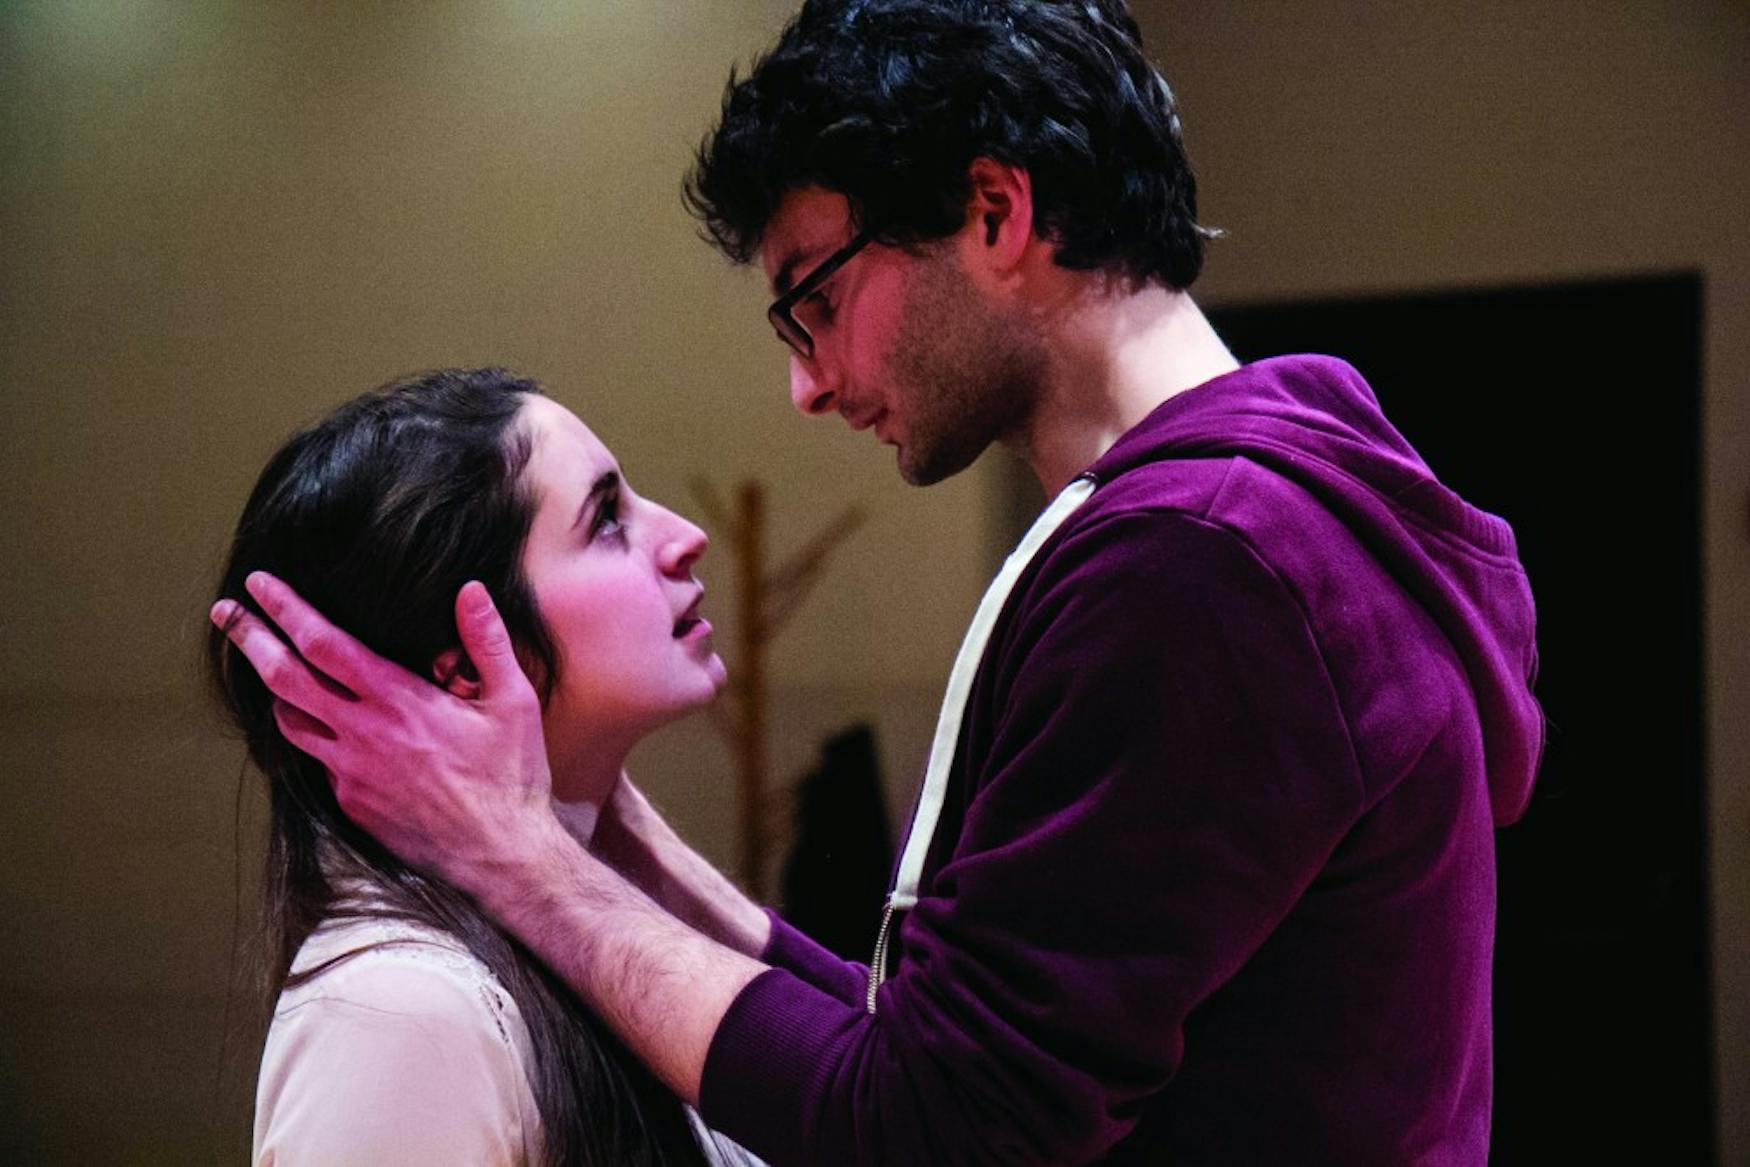 LOVE AT FIRST SIGHT: Romeo (Aaron Fischer ’15, right) and Juliet’s (Aliza Sotsky ’15, left) already fast-paced relationship progressed even more quickly due to the show’s 45-minute run time.